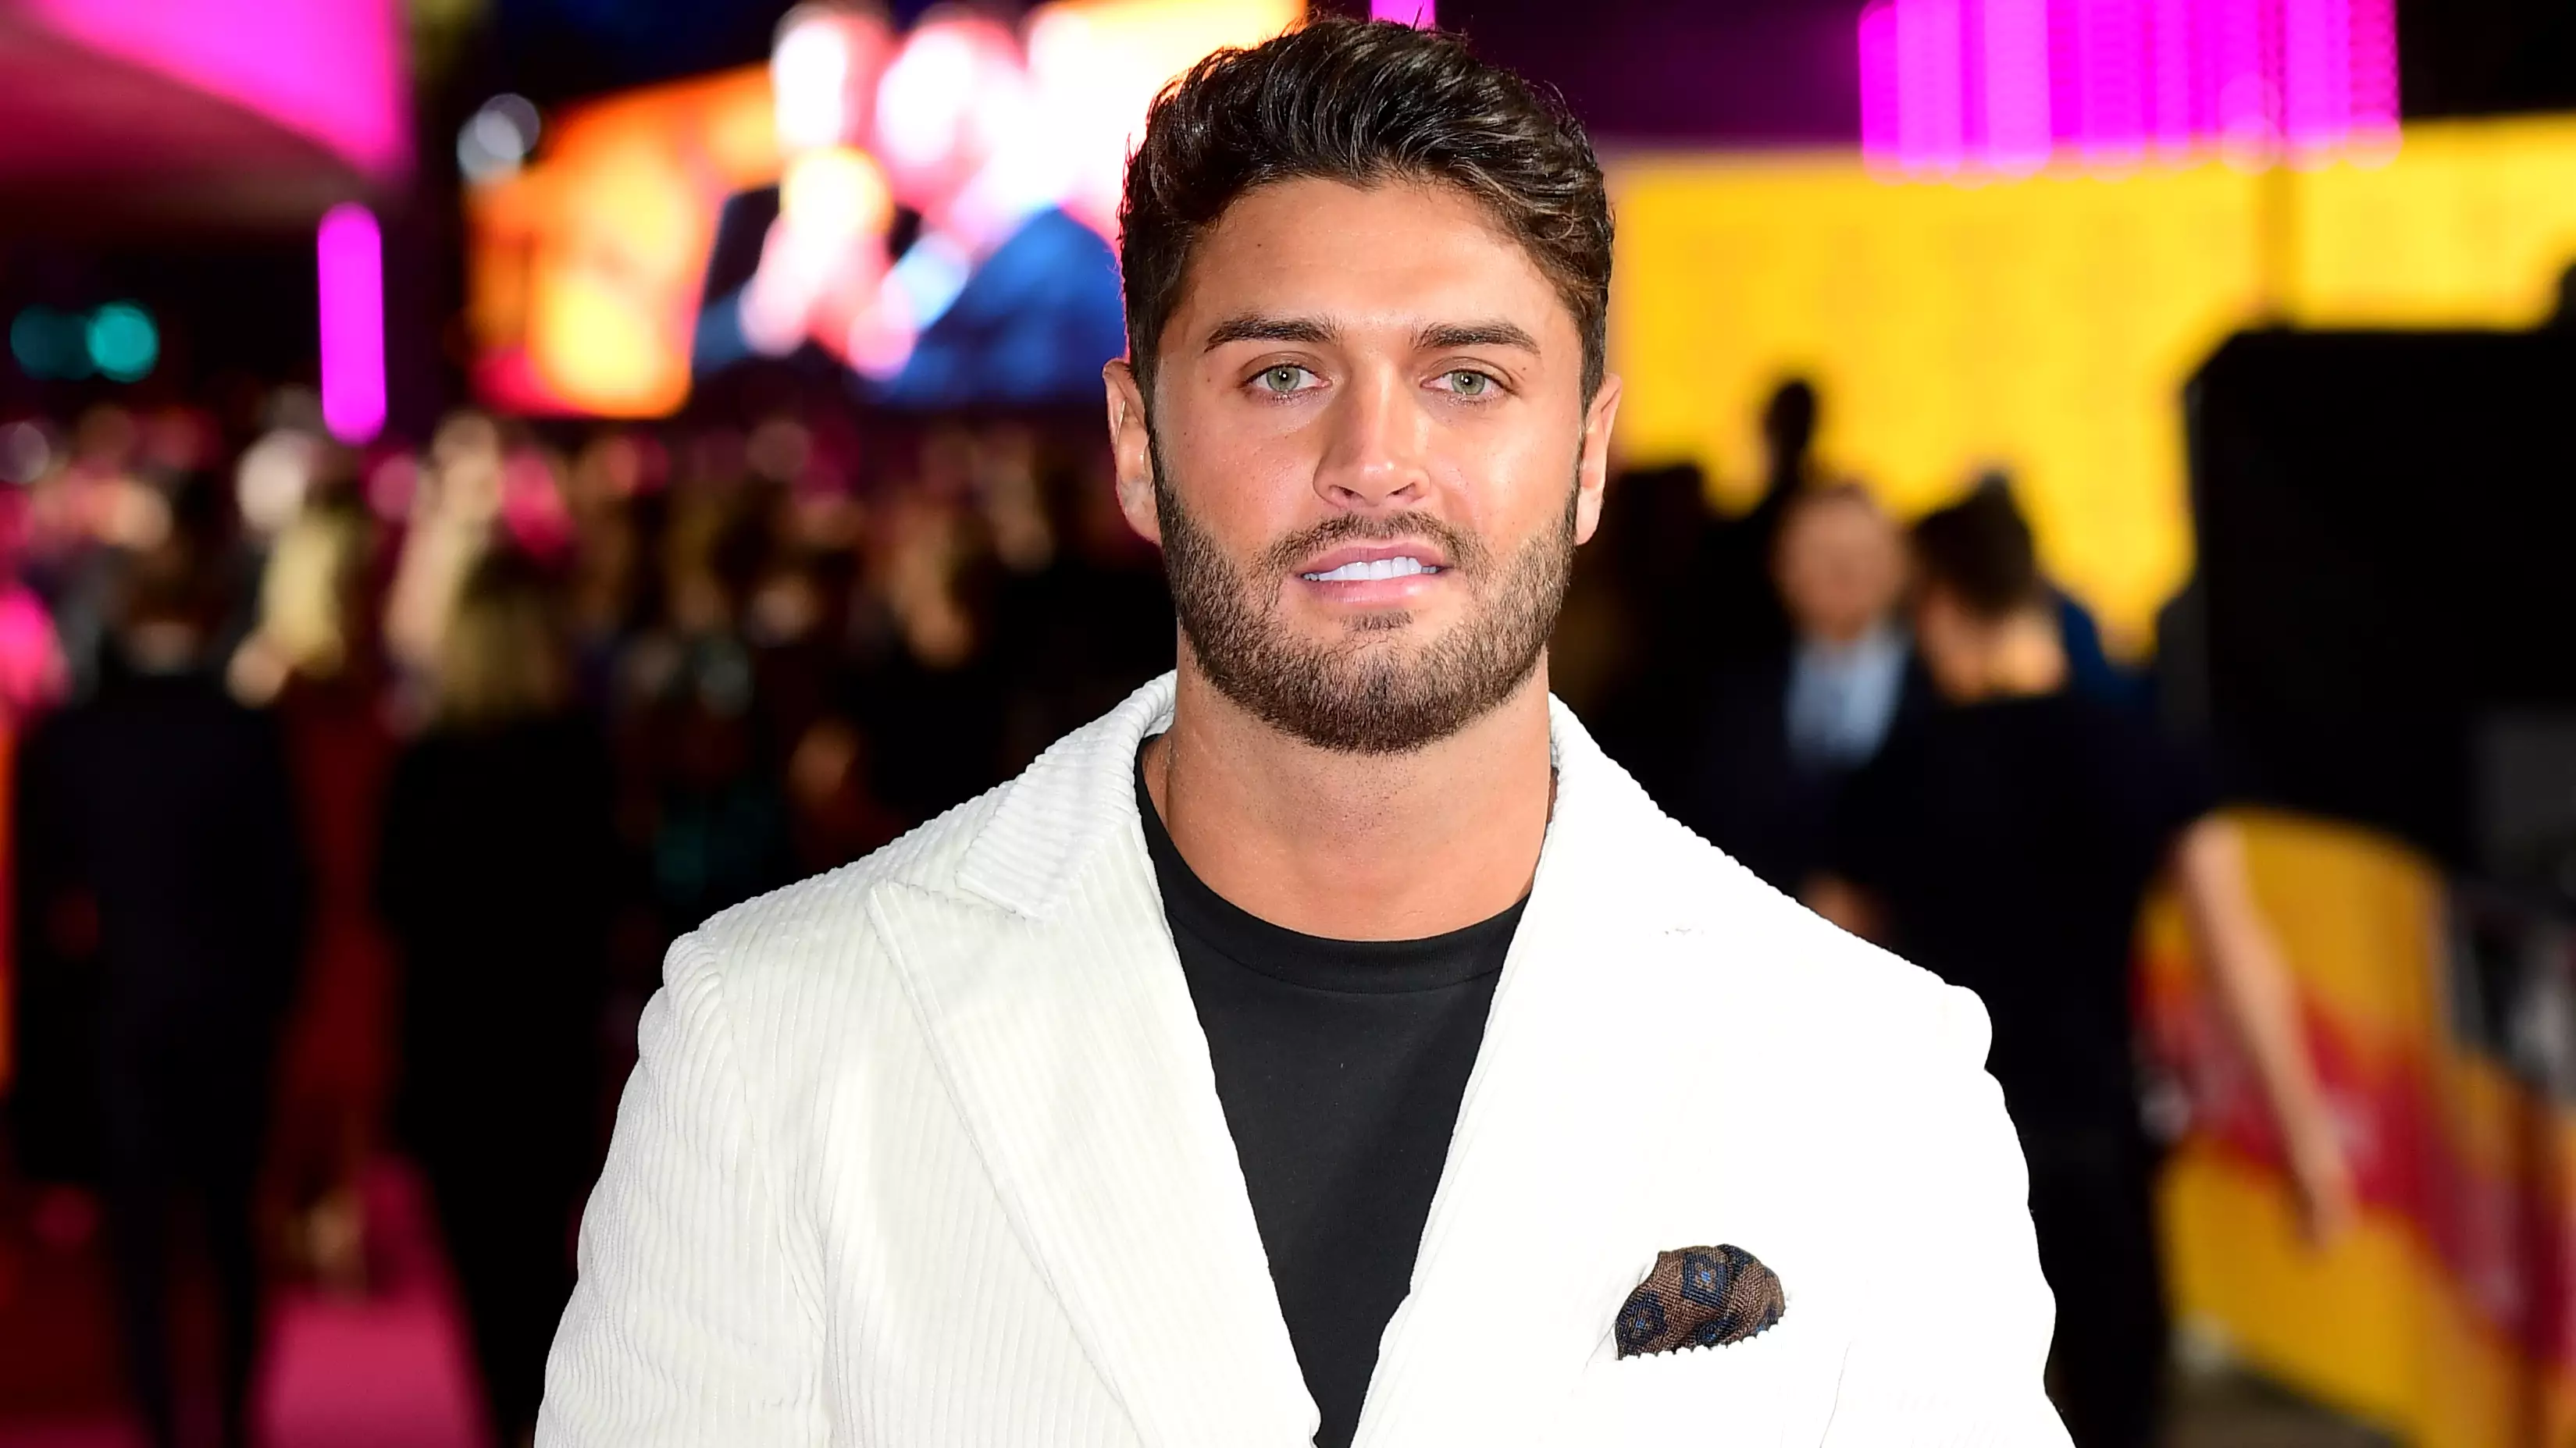 Love Island 2019: Tribute To Mike Thalassitis To Air In New Series